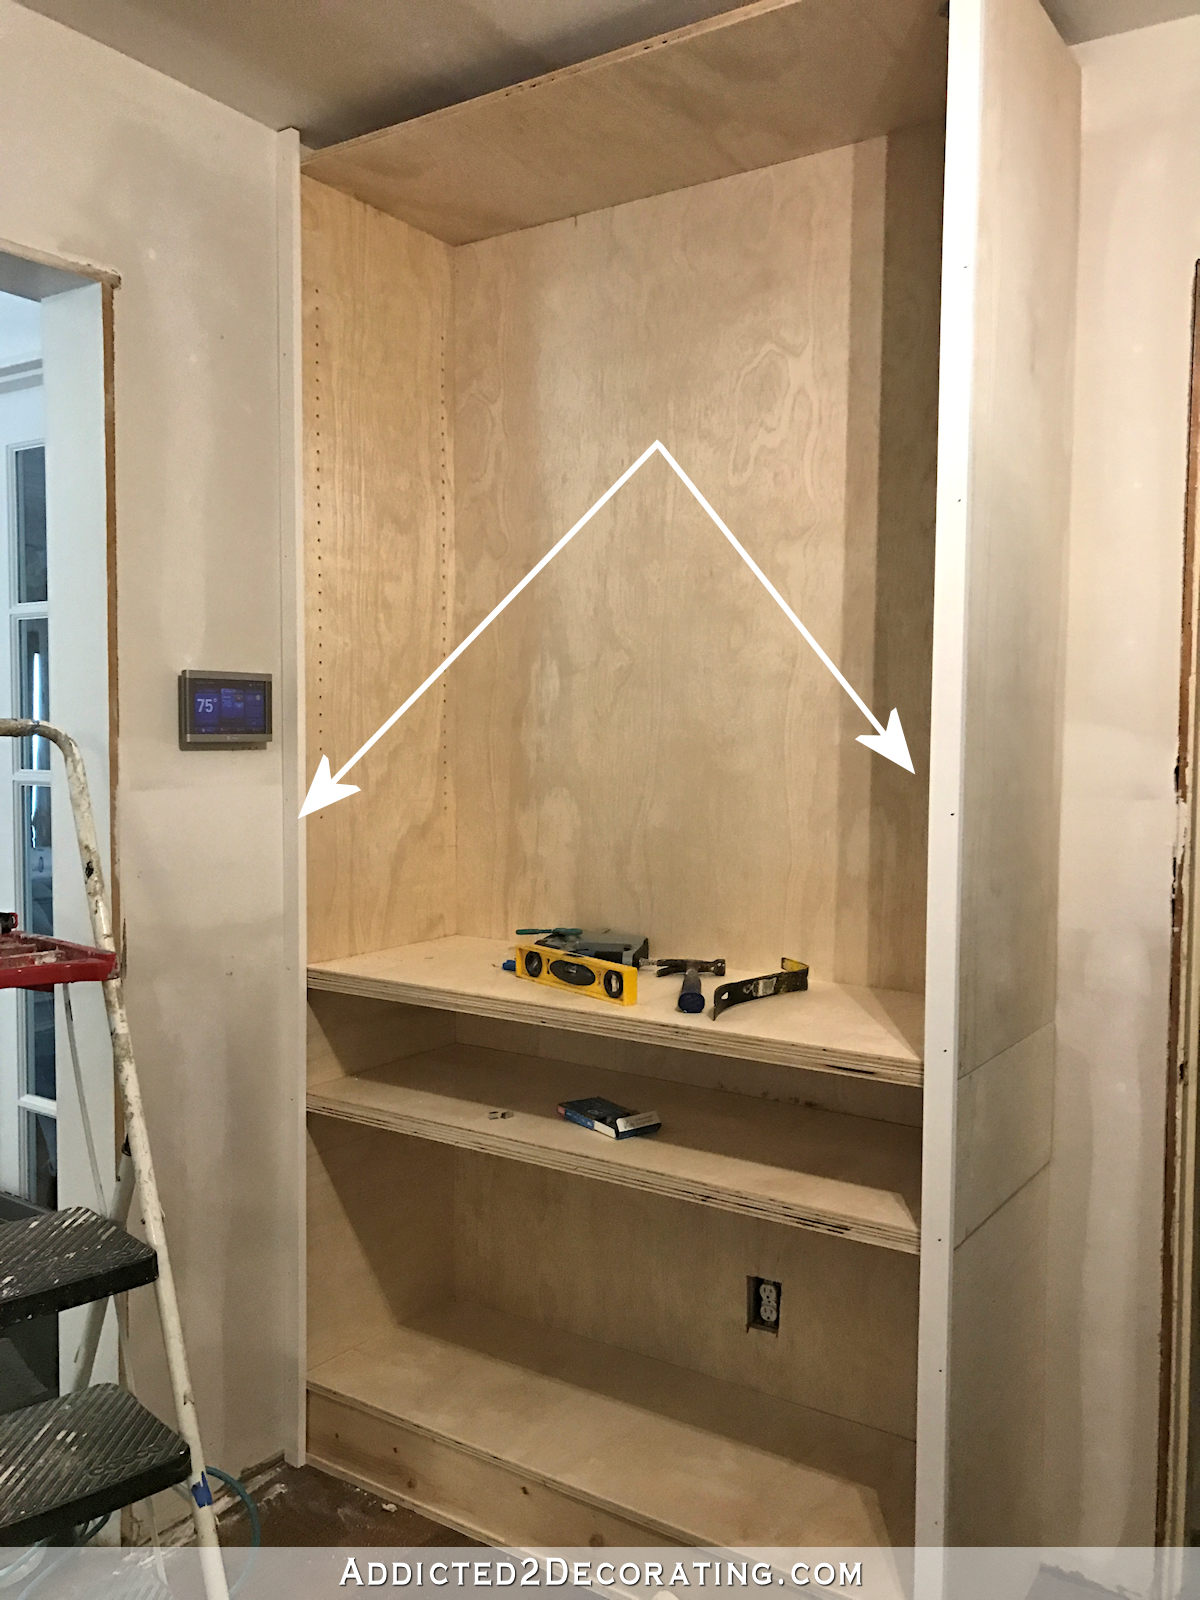 how to build cabinets- 16 - add side trim to face of cabinets